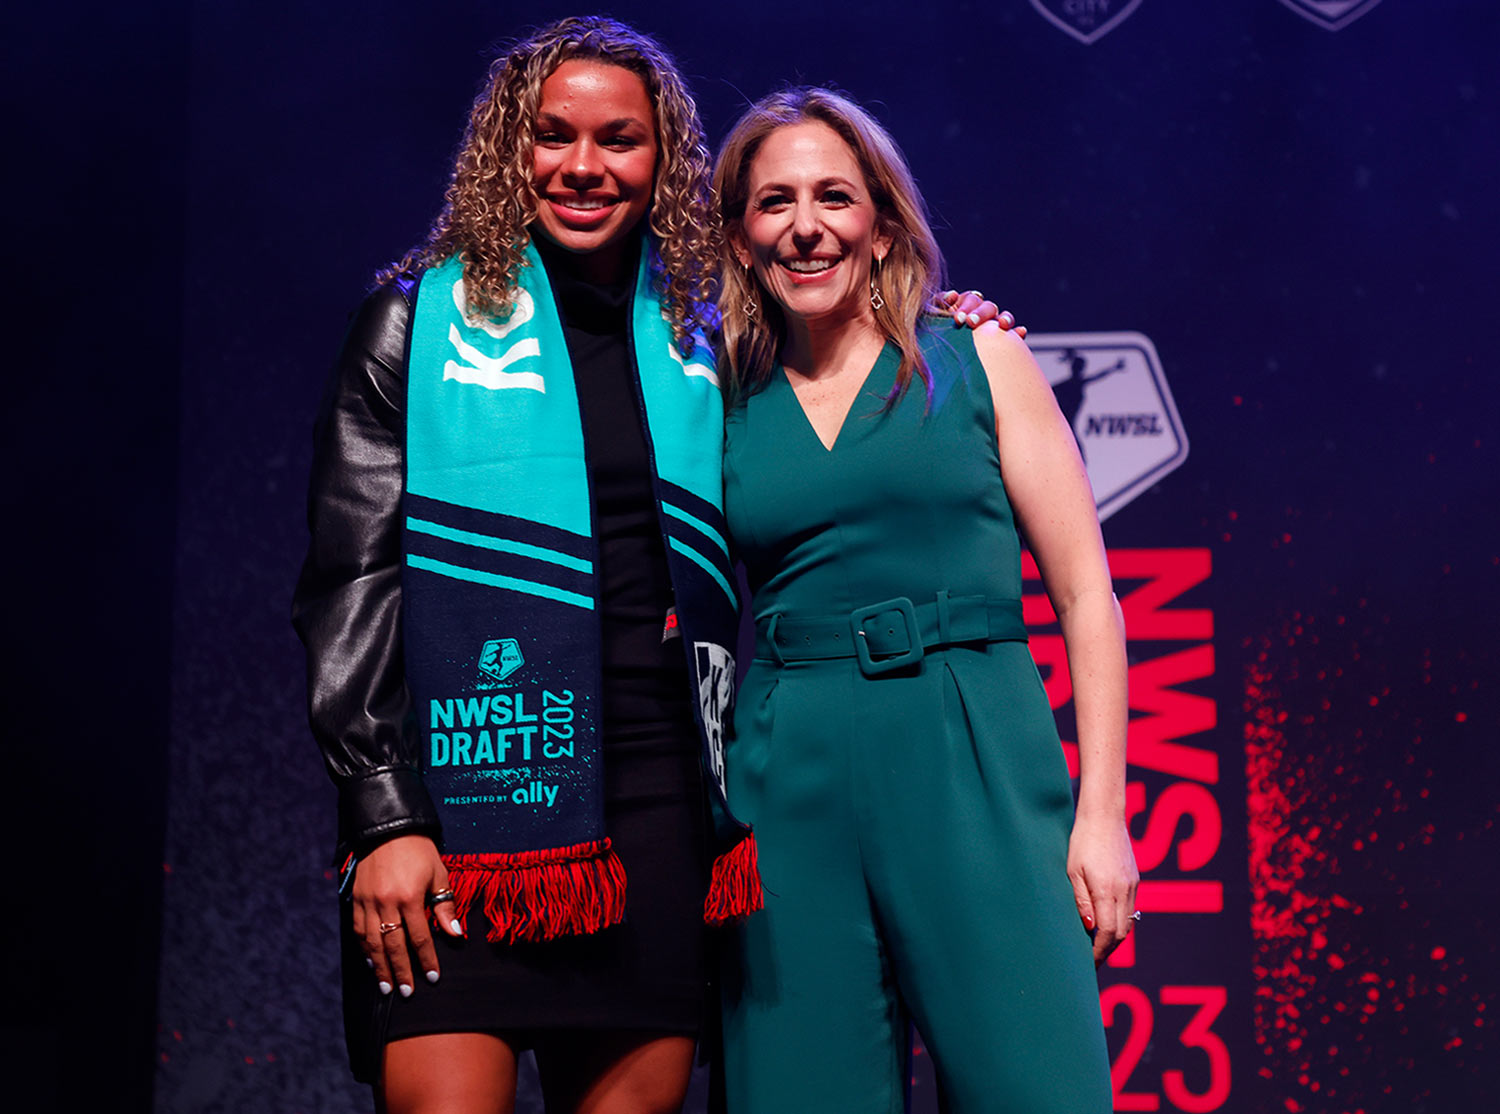 Jessica Berman smiles while standing on the NWSL 2023 Draft Pick stage beside a woman soccer athlete